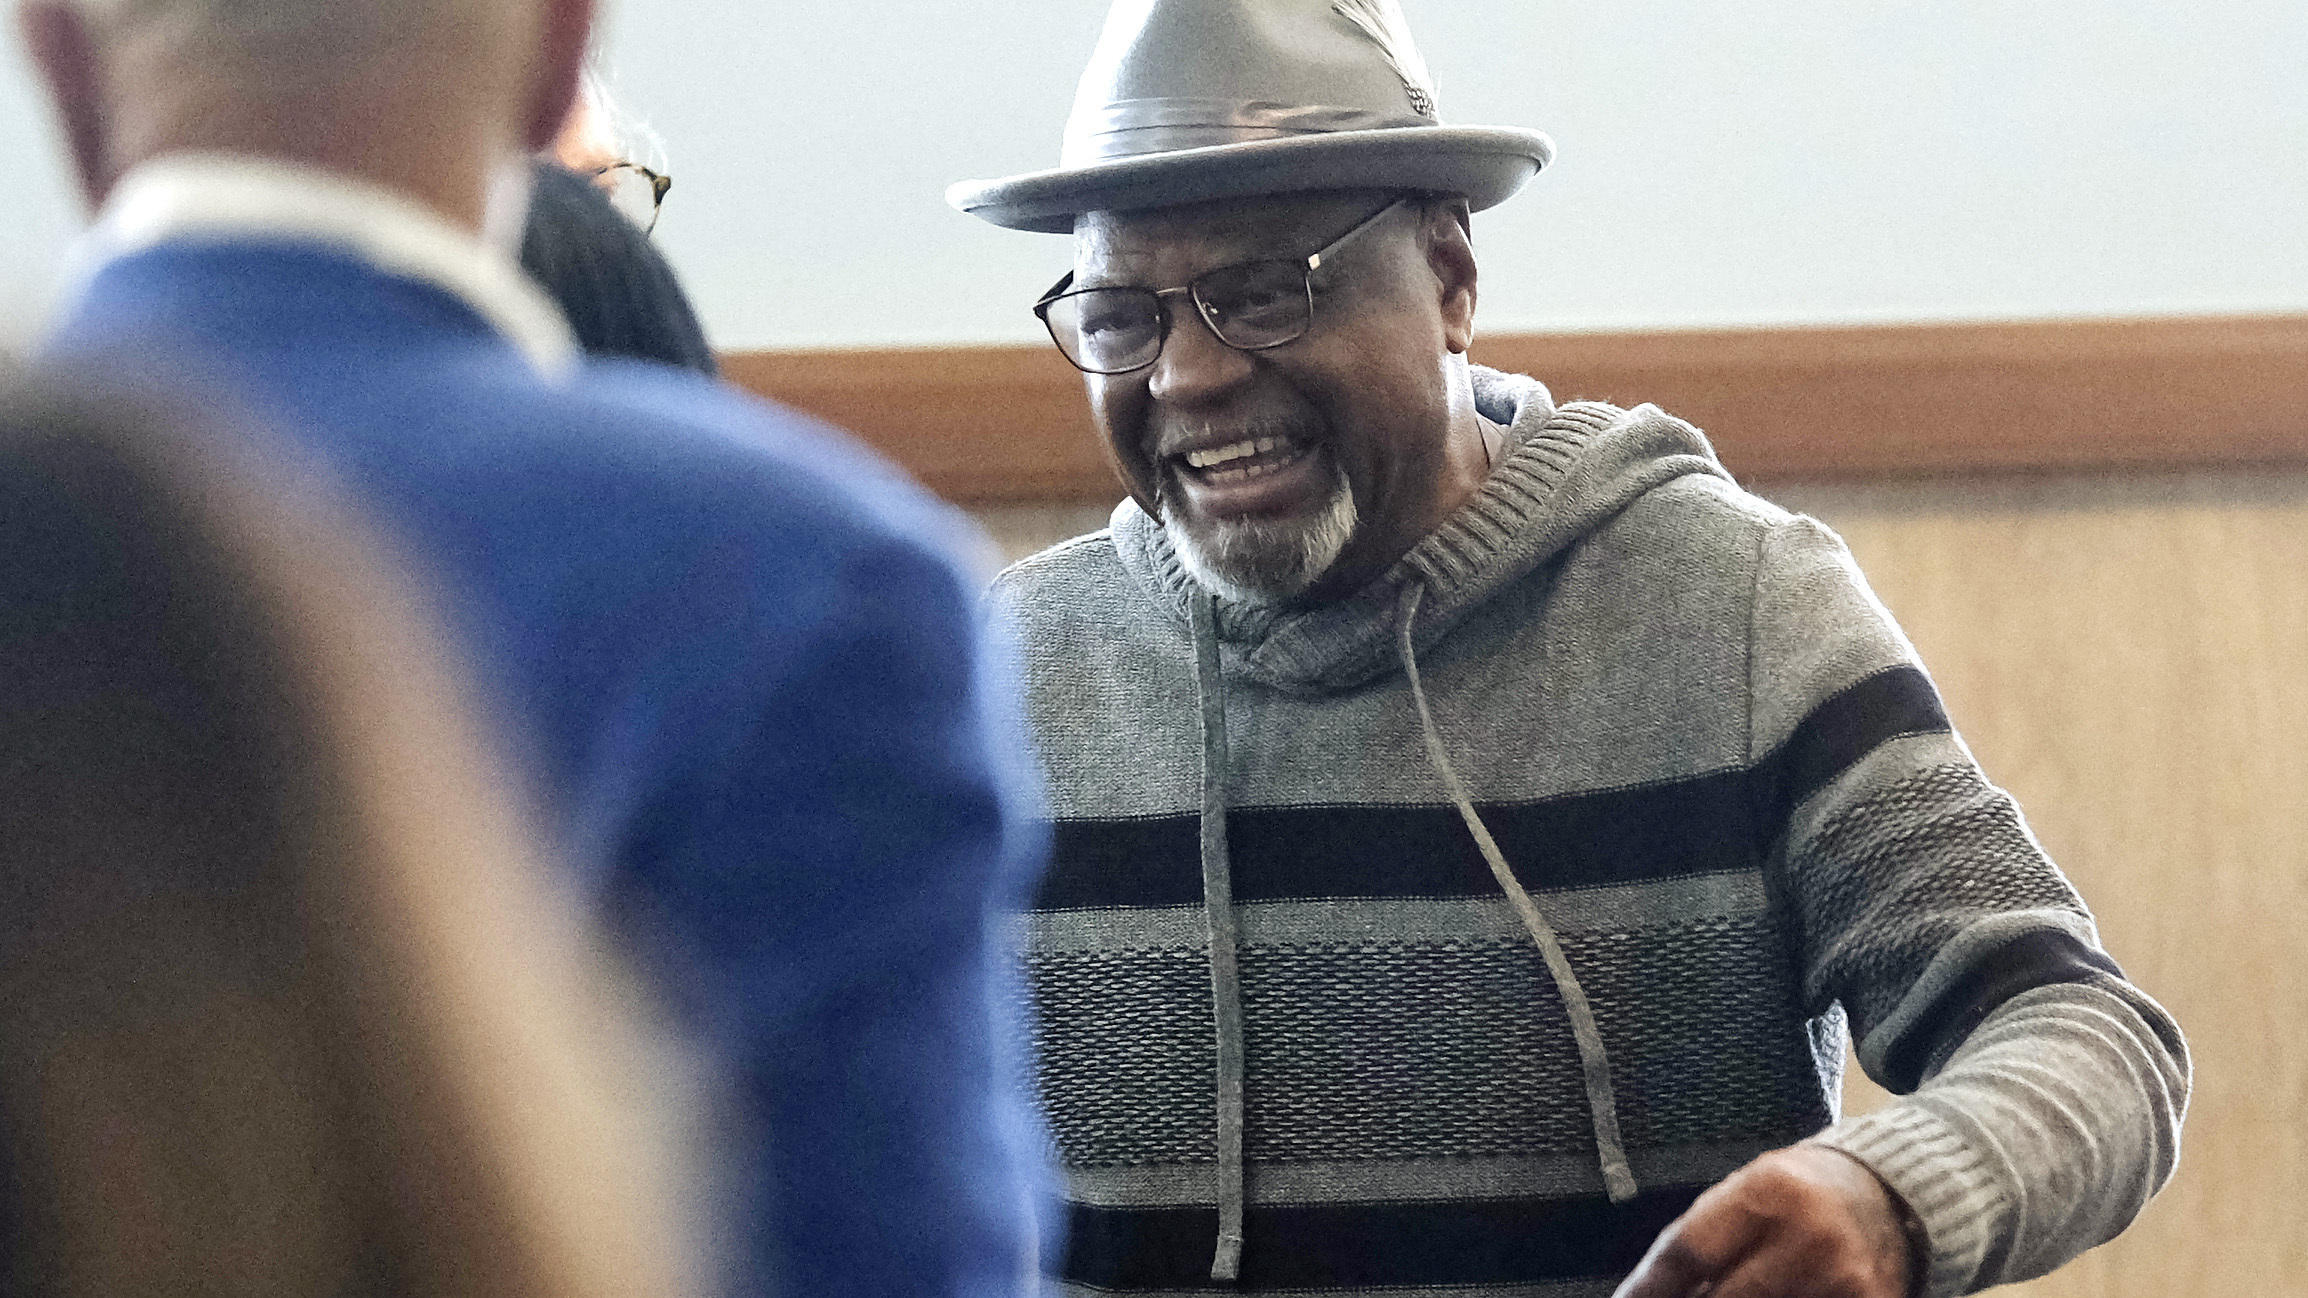 An Oklahoma judge ruled a man who spent 48 years in prison for murder is innocent